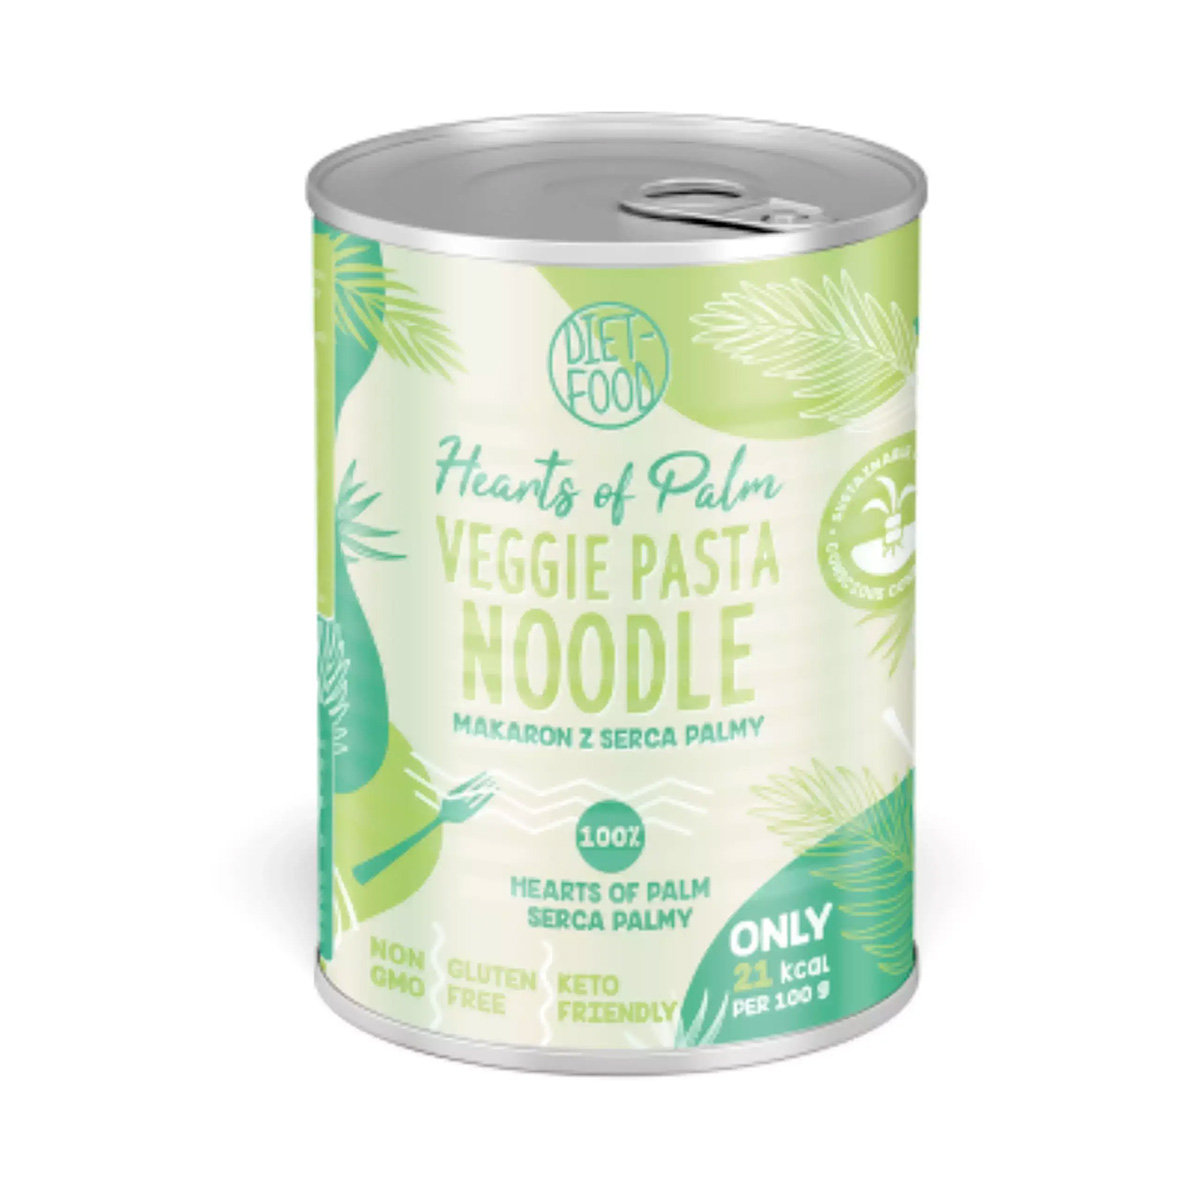 Diet-Food Hearts of Palm Veggie Pasta Noodle Makaron 220g